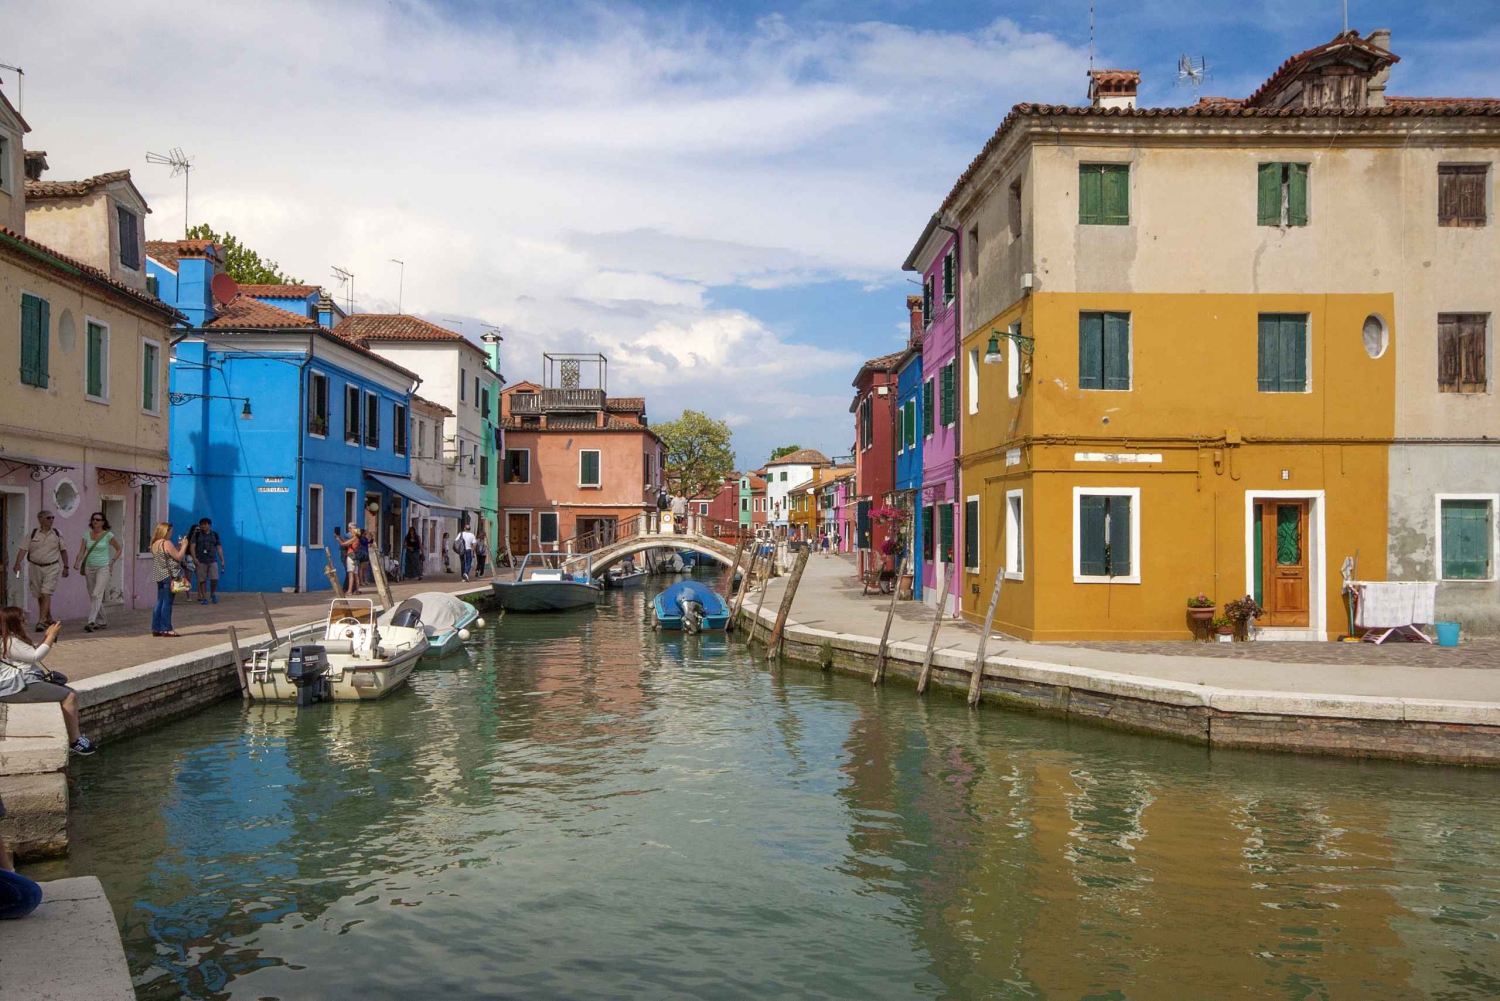 Murano, Burano and Torcello Islands Full-Day Tour